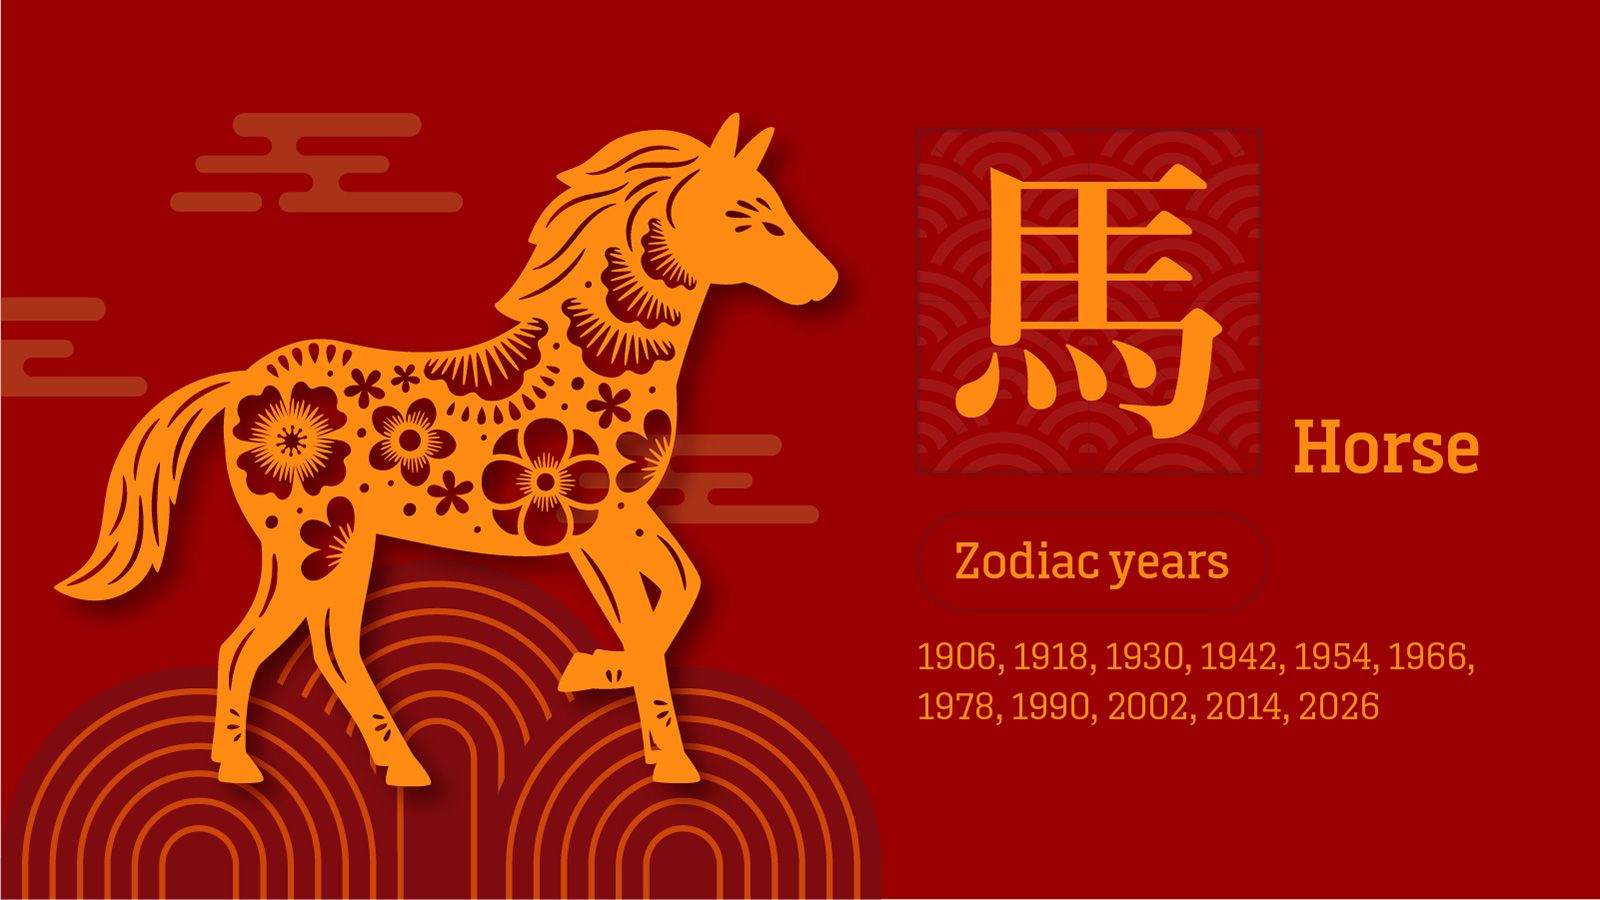 Horses should take some trips for better luck in the Year of the Dragon.